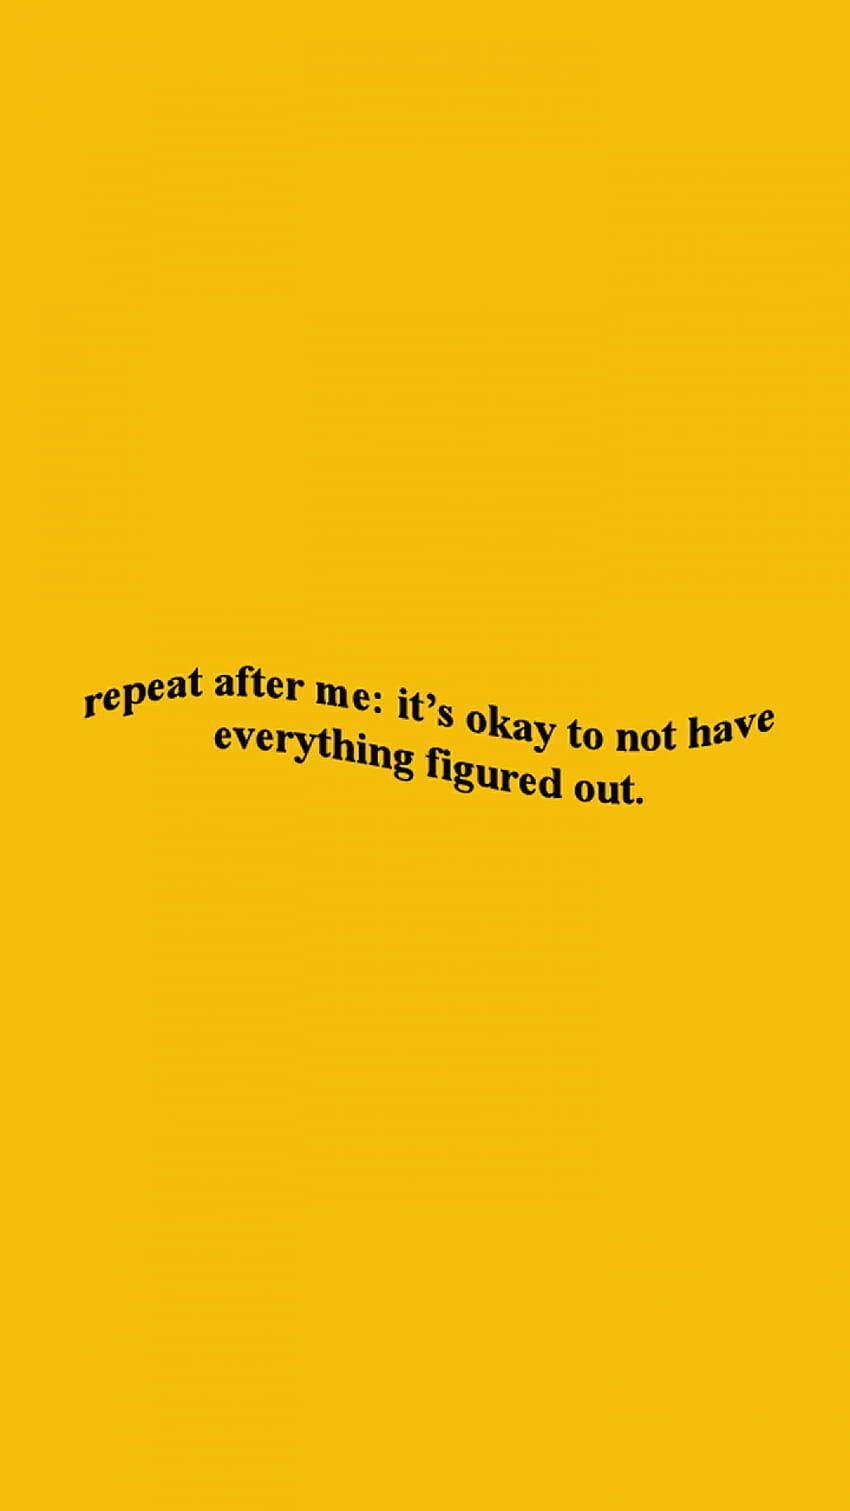 Yellow background with black text that says 